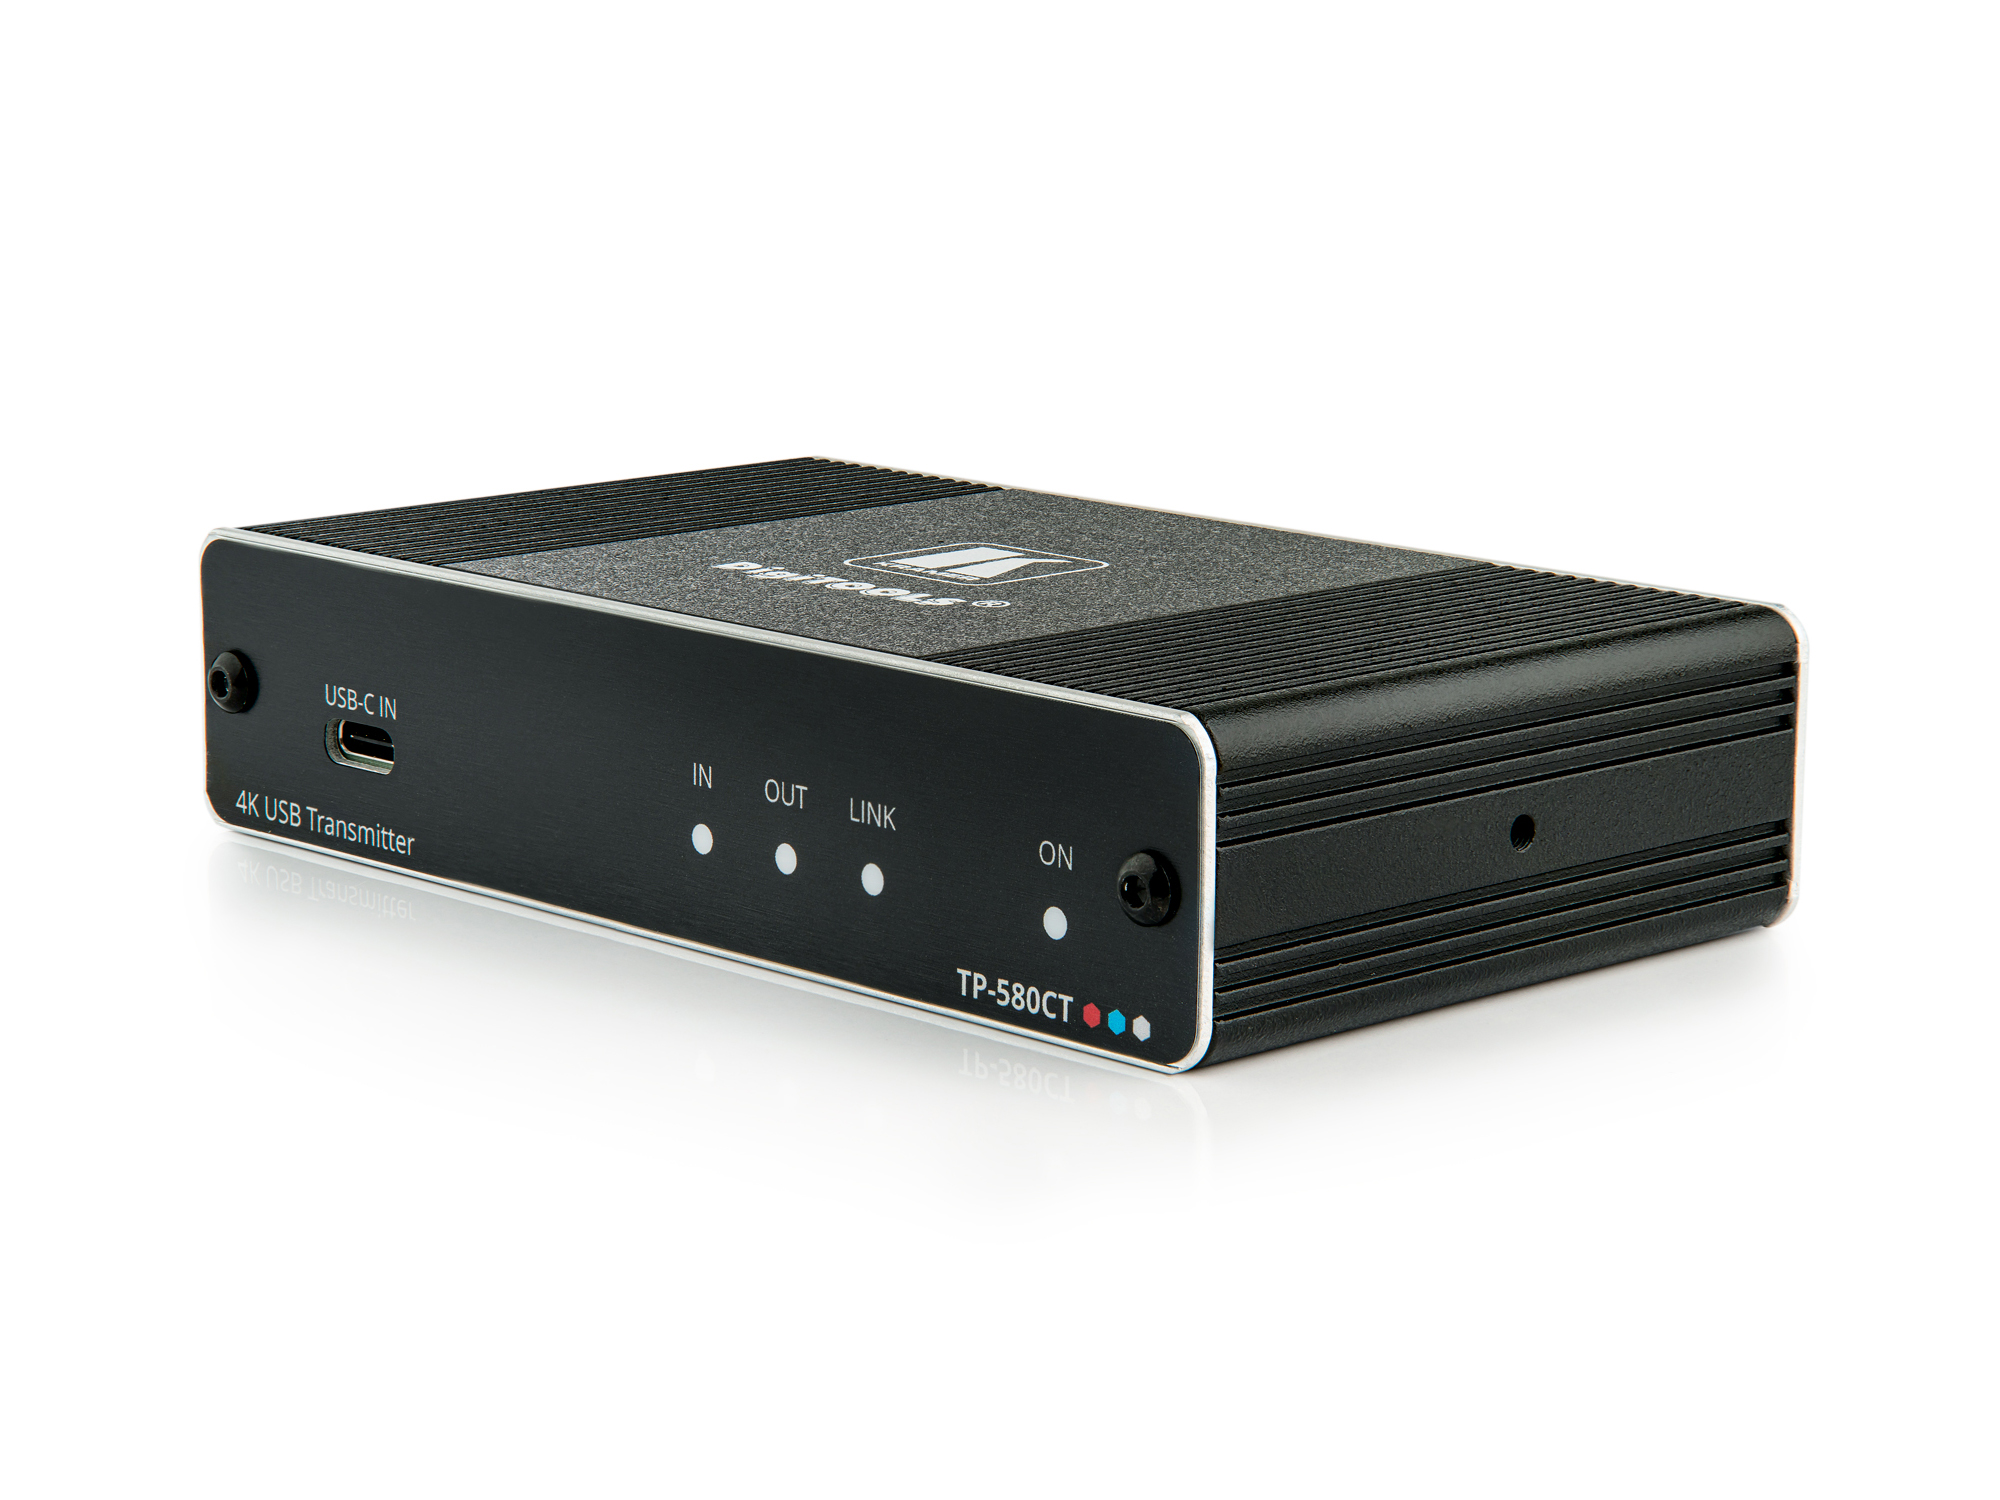 TP-580CT 4K60 USB-C Extender (Transmitter) with RS-232 and IR over Long-Reach HDBaseT by Kramer